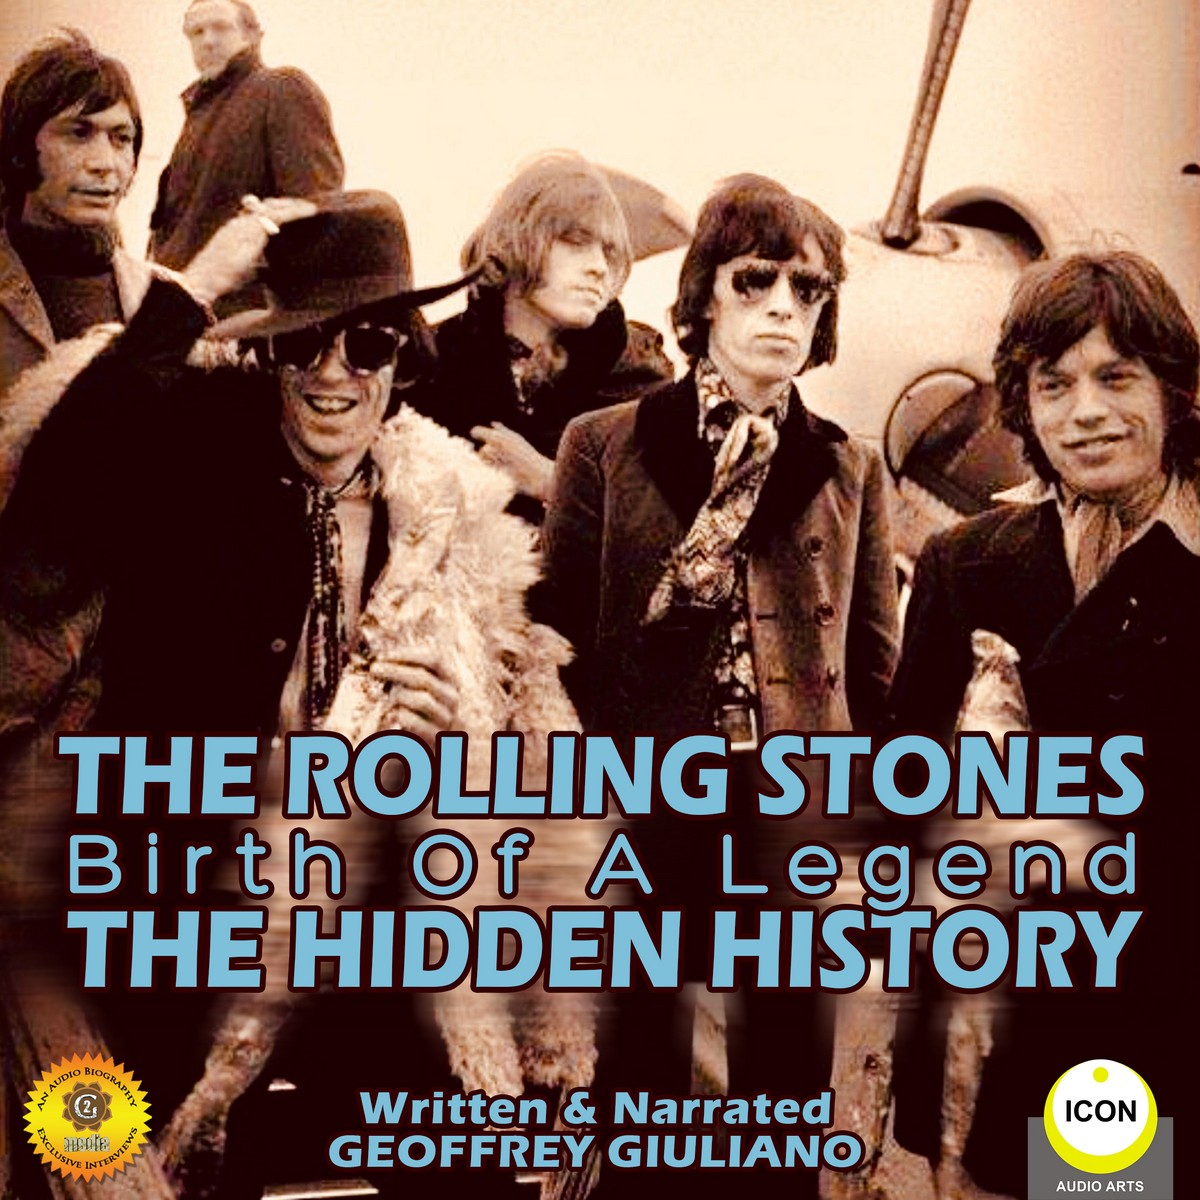 The Rolling Stones: Birth of a Legend – The Hidden History